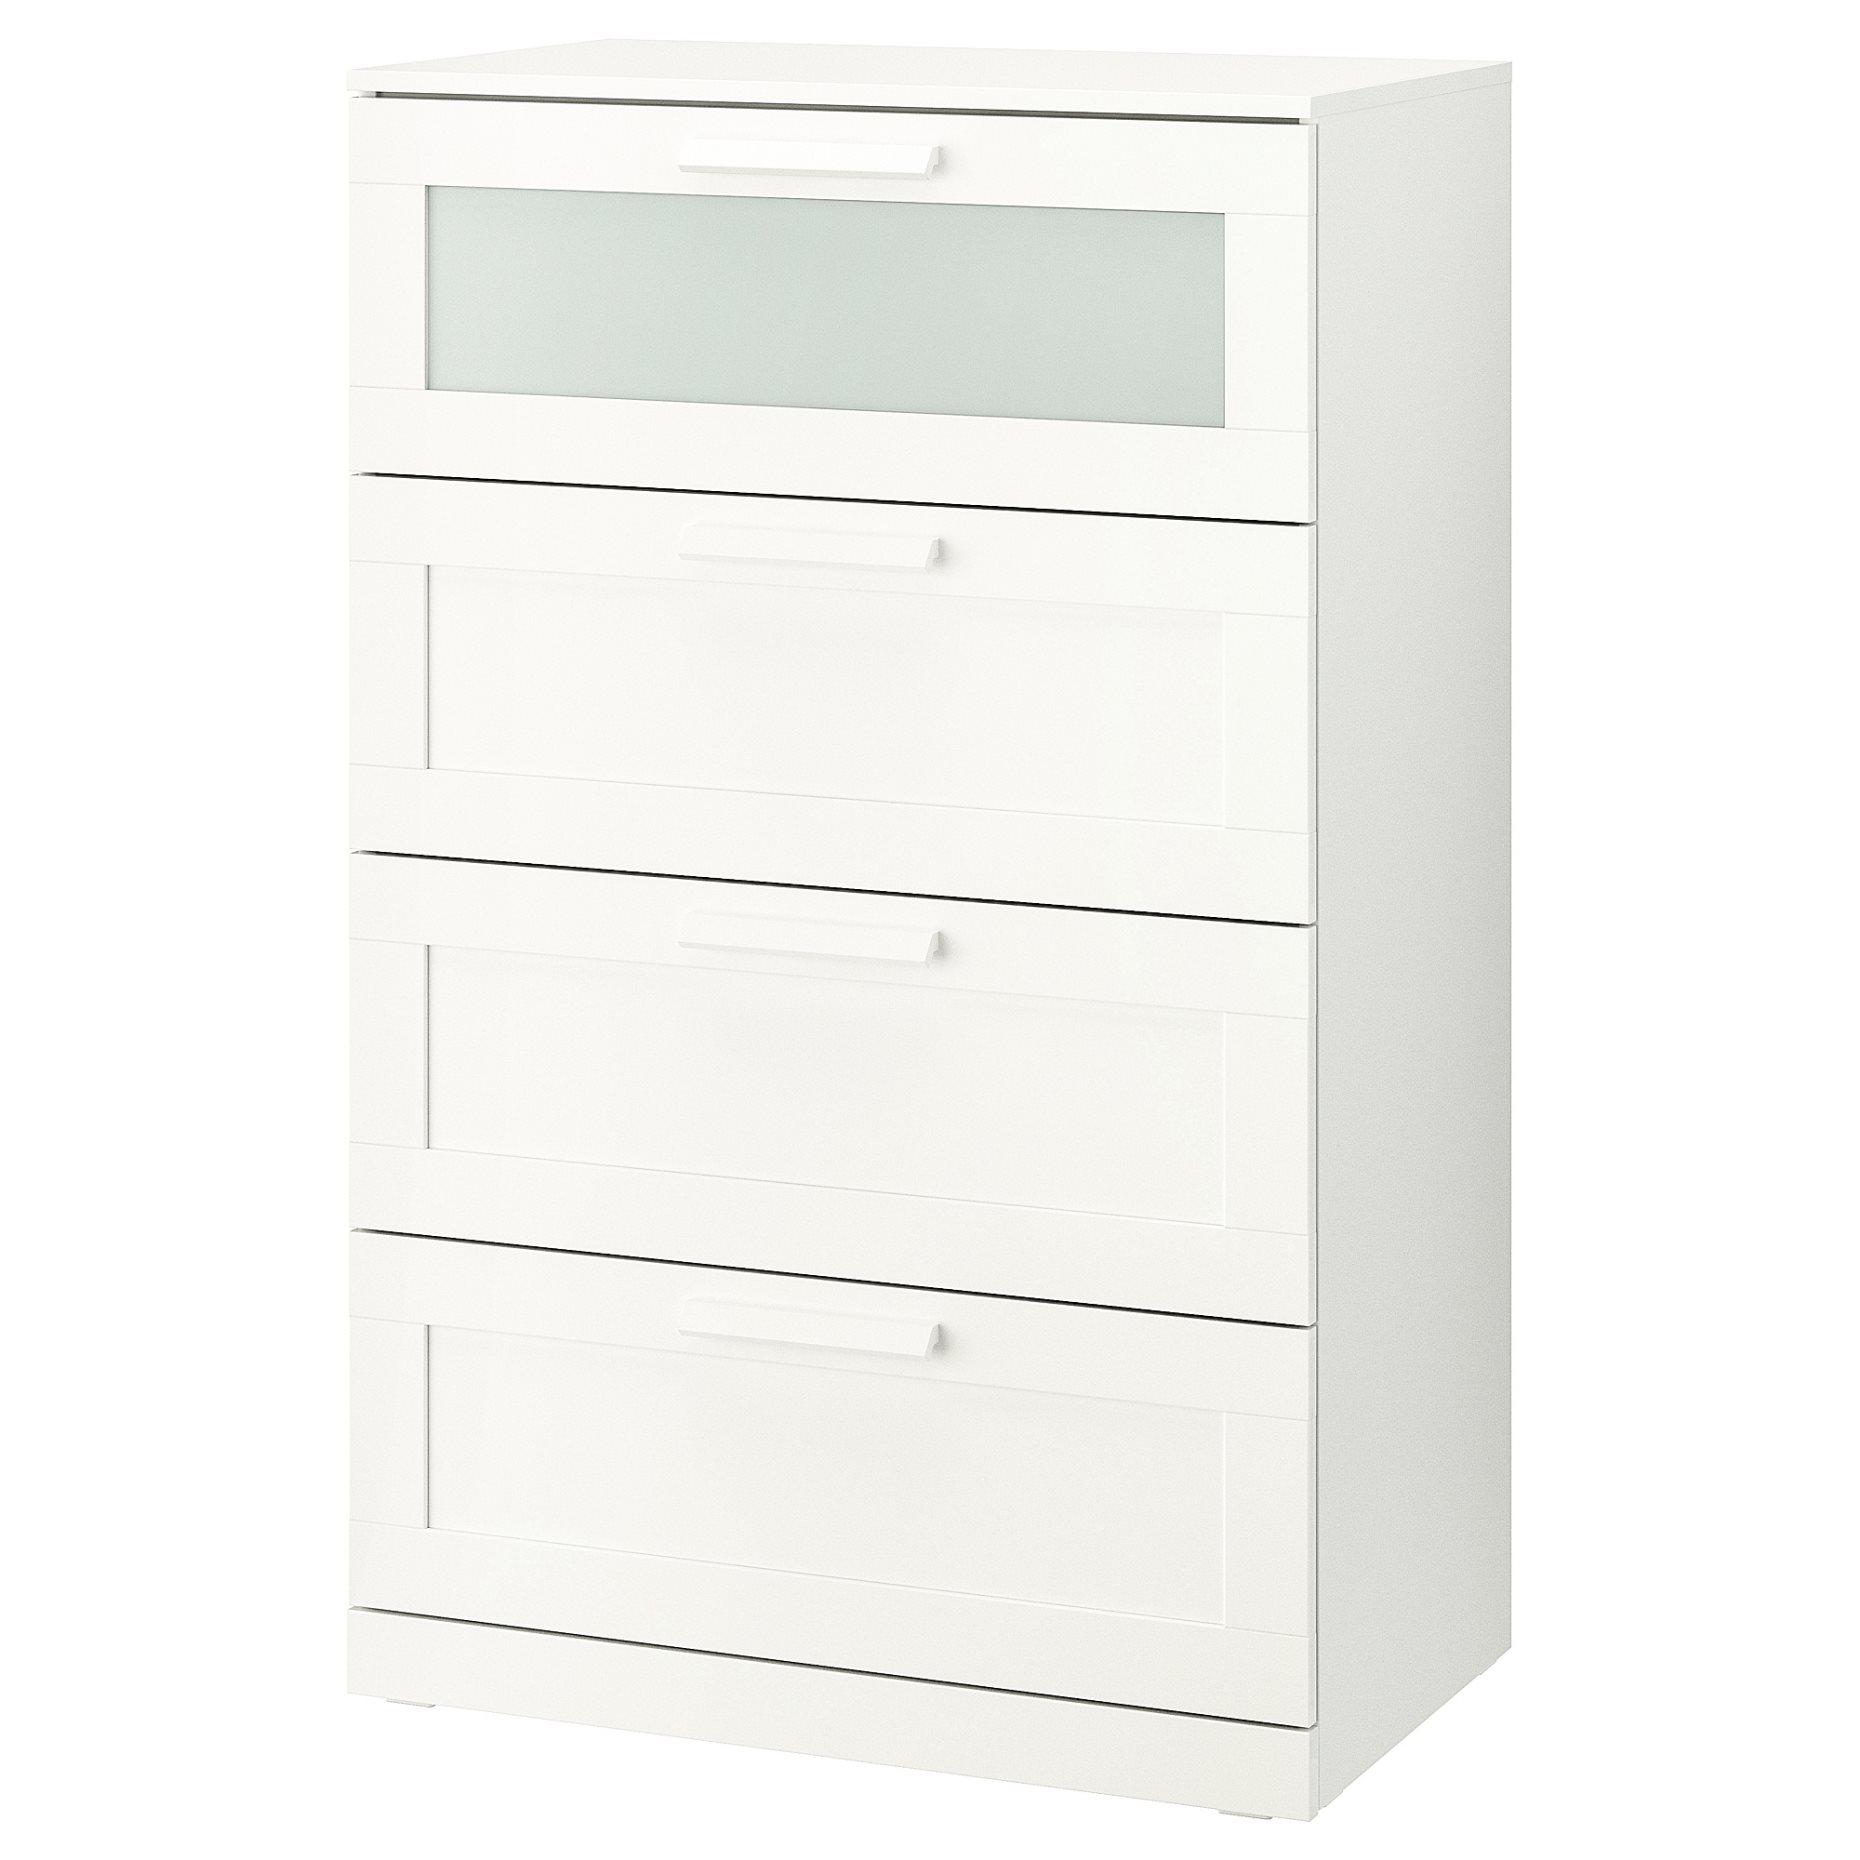 BRIMNES, chest of 4 drawers, 903.920.46